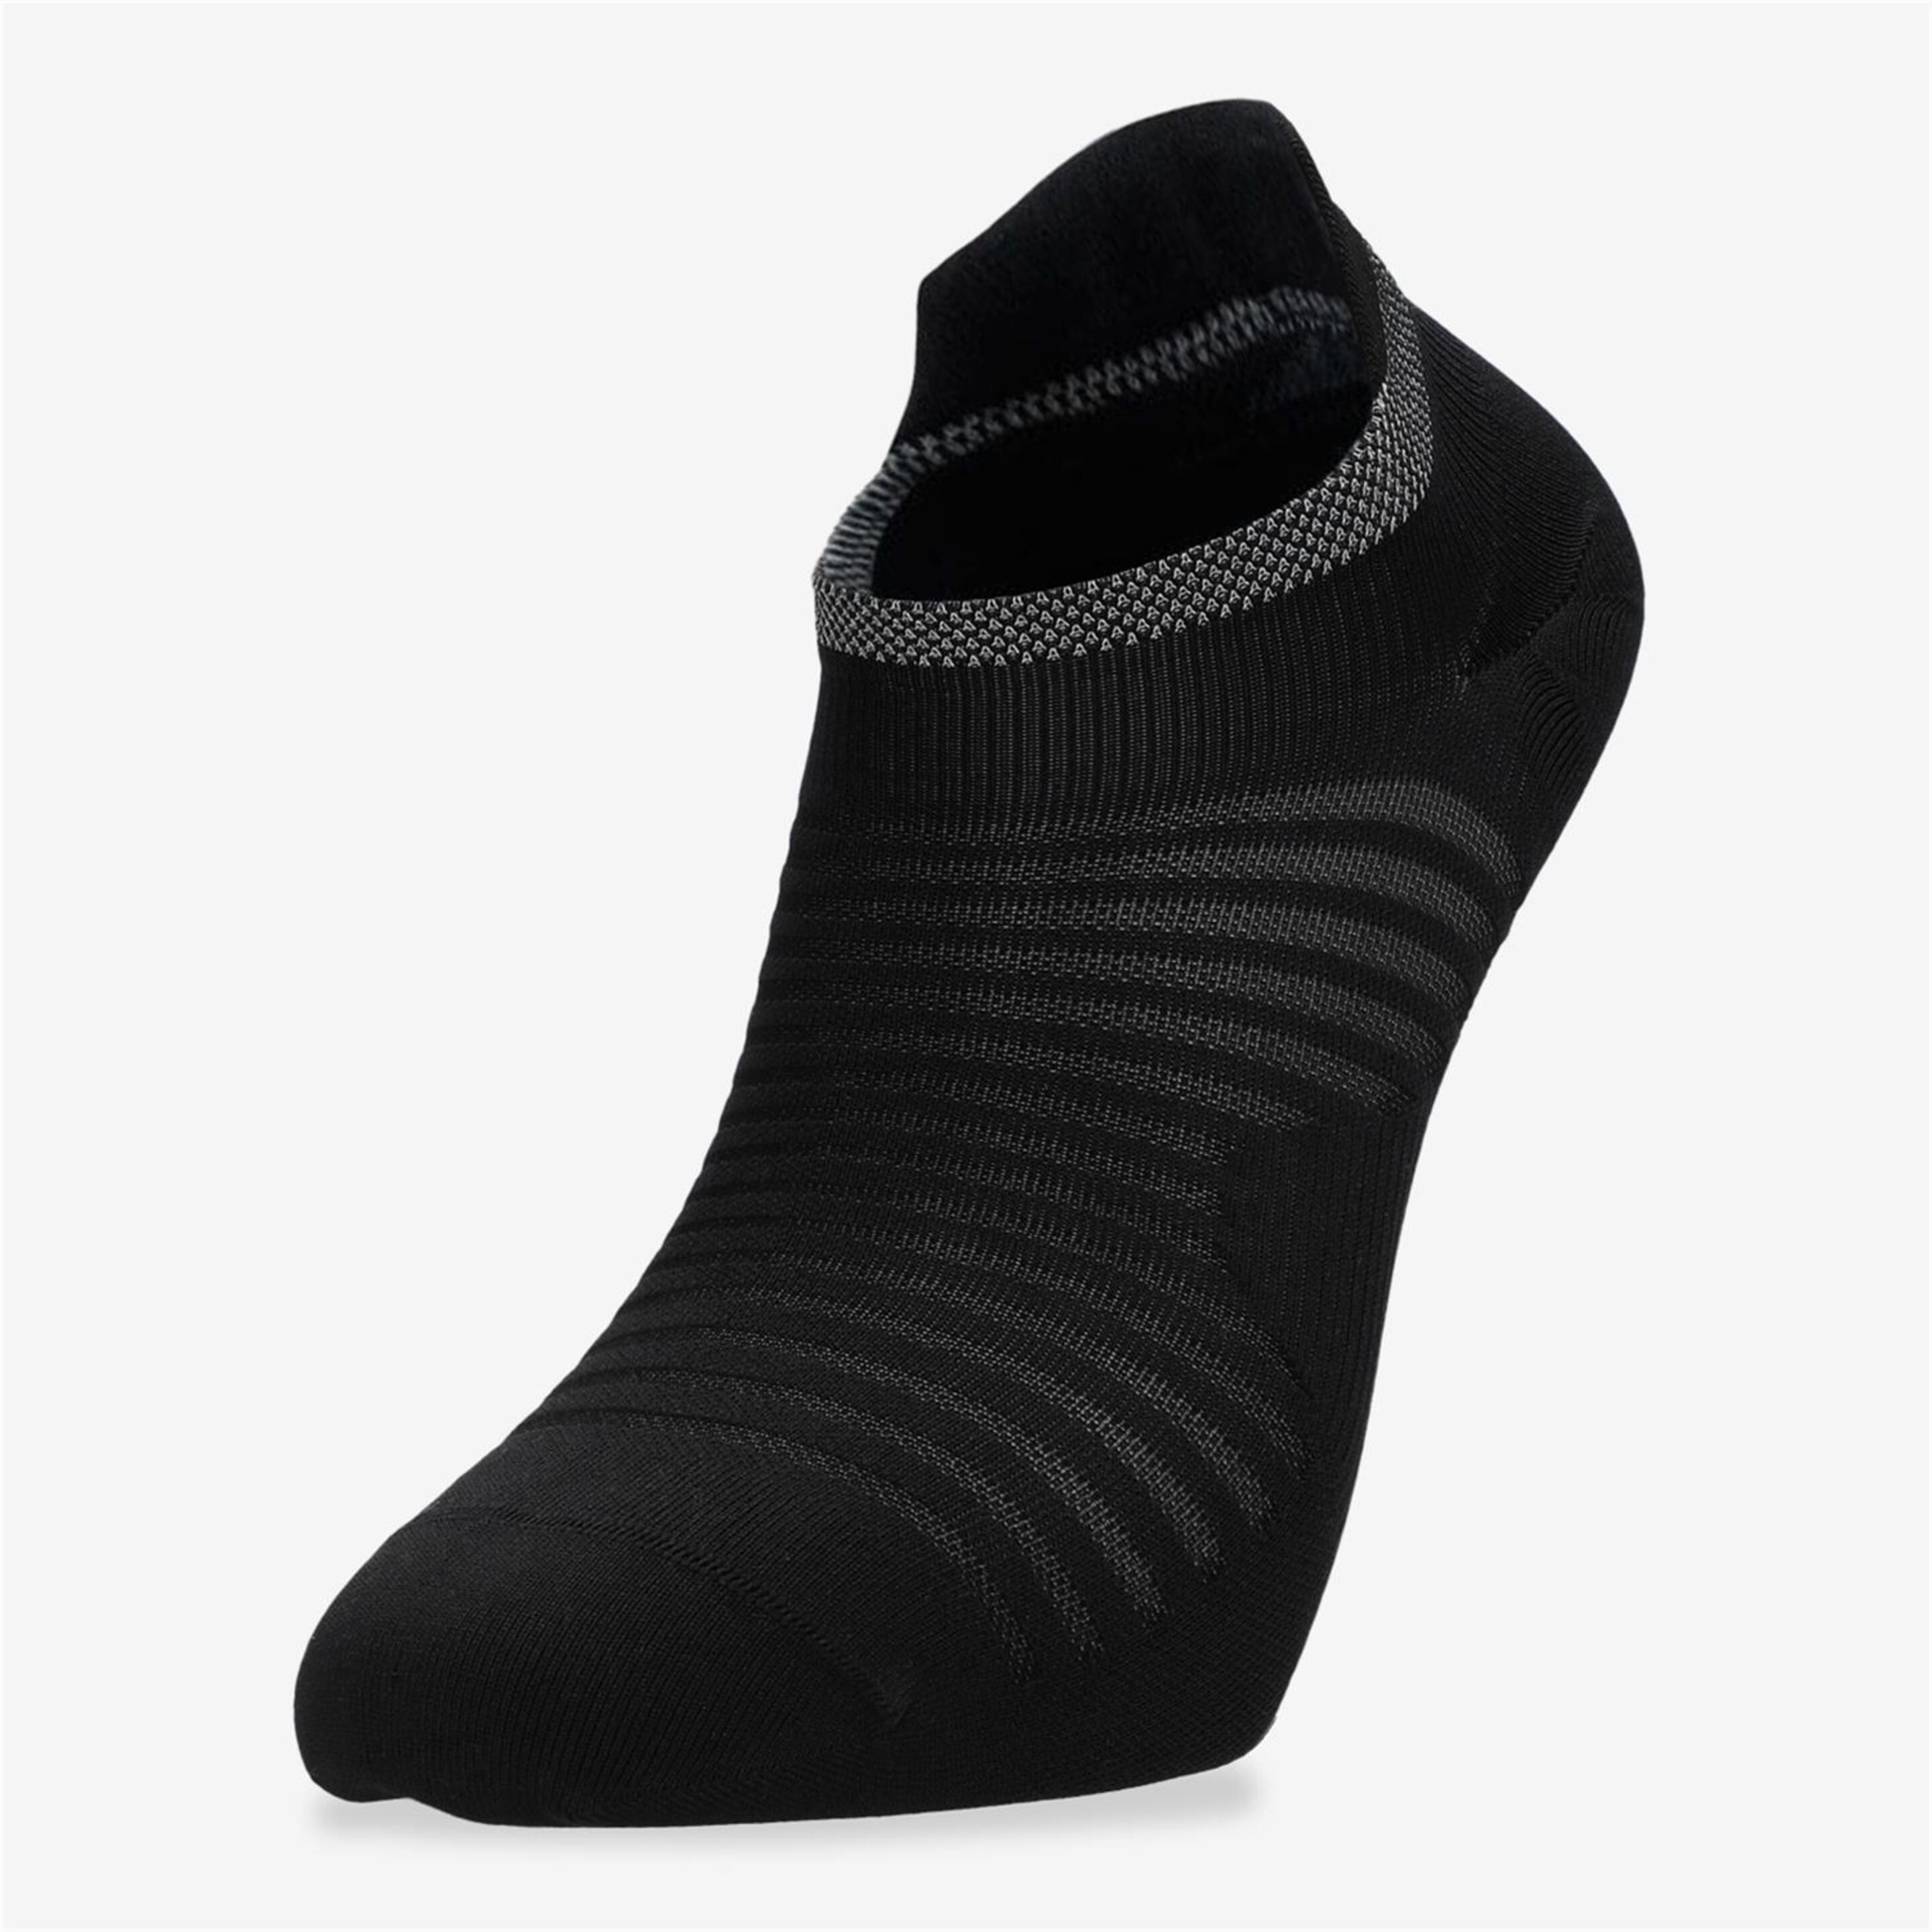 Calcetines Nike - negro - Calcetines Invisibles Hombre